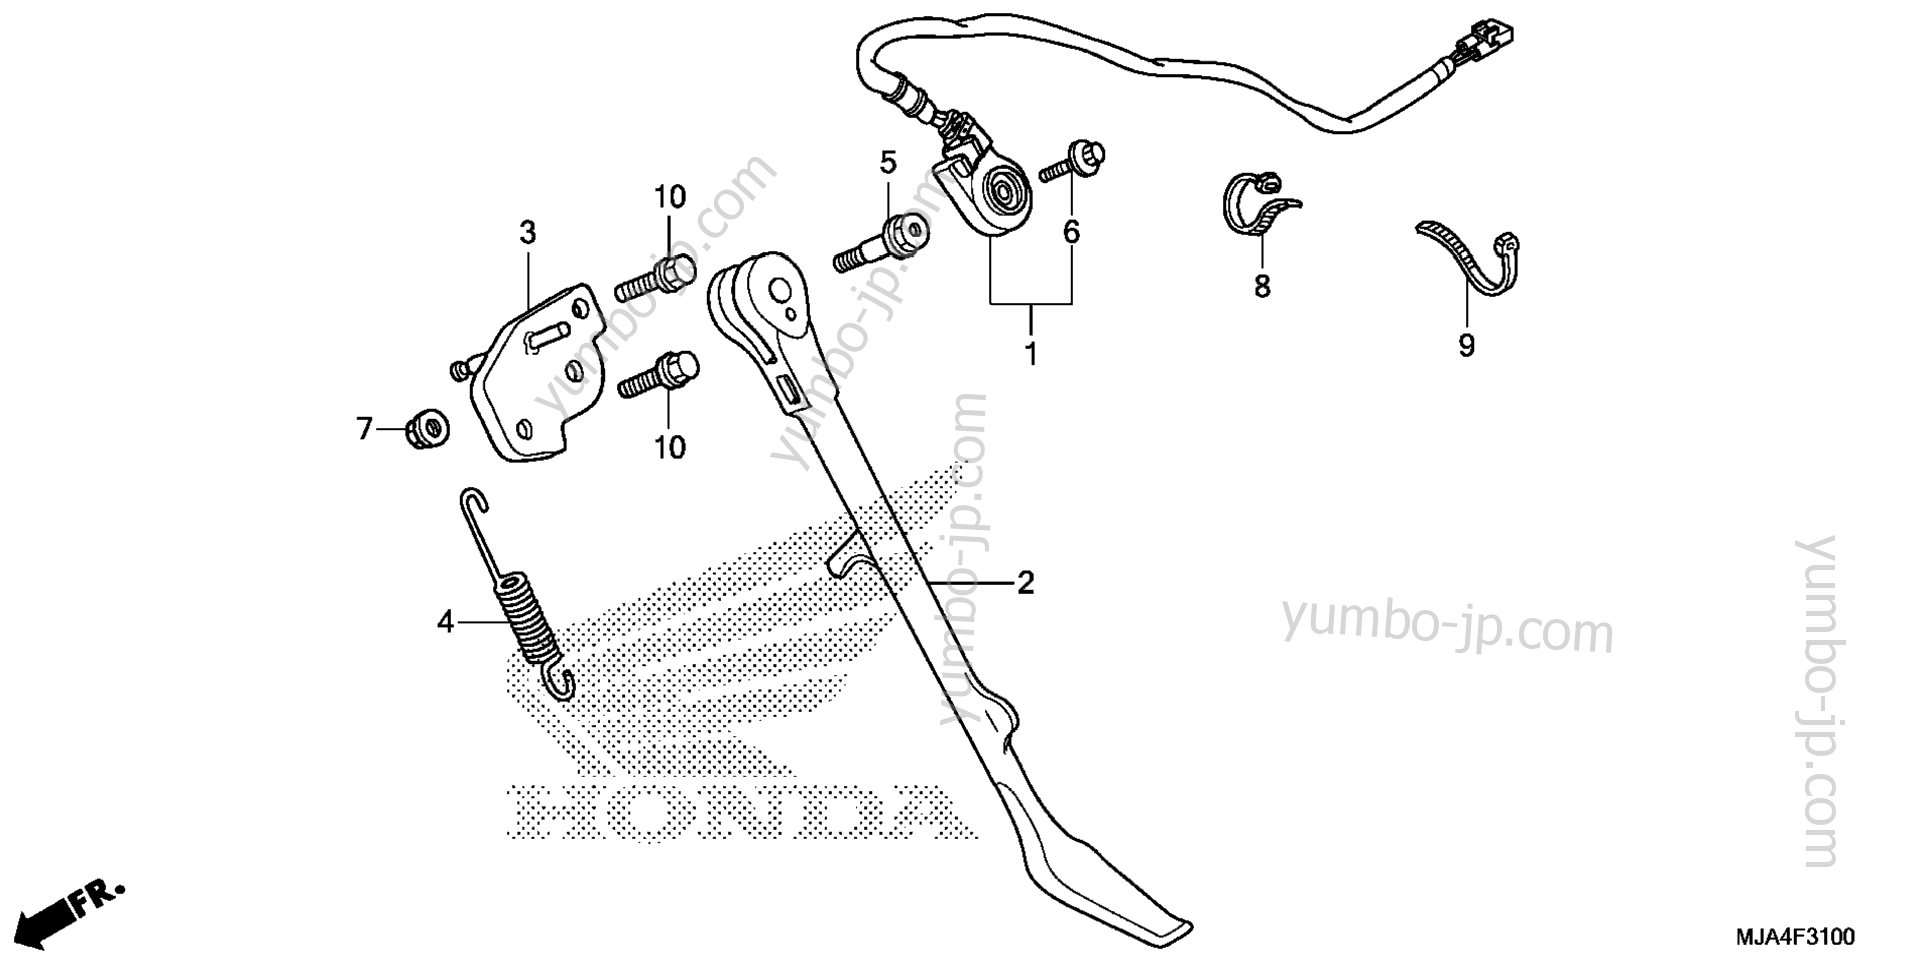 SIDE STAND (1) for motorcycles HONDA VT750CA AC 2012 year